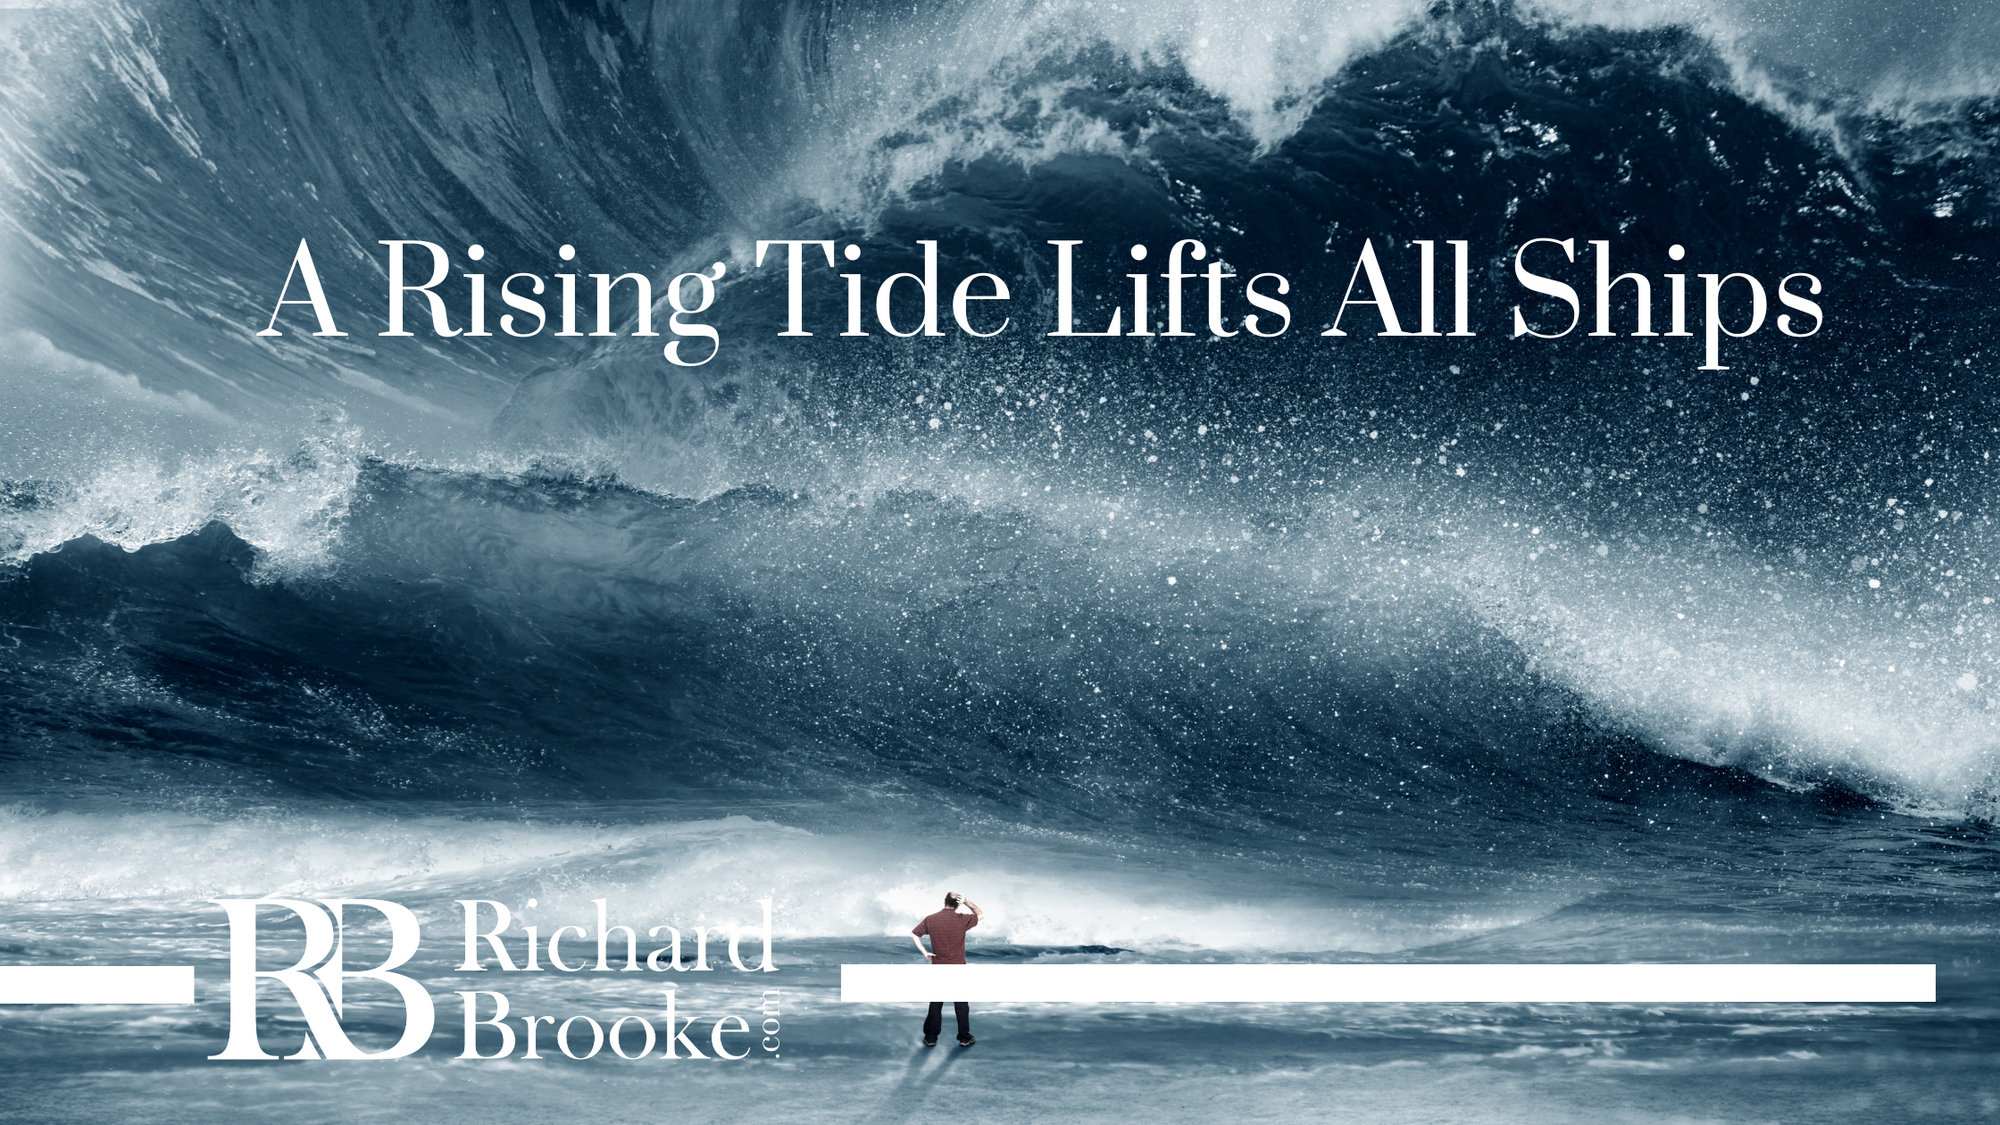 A Rising Tide Lifts All Ships